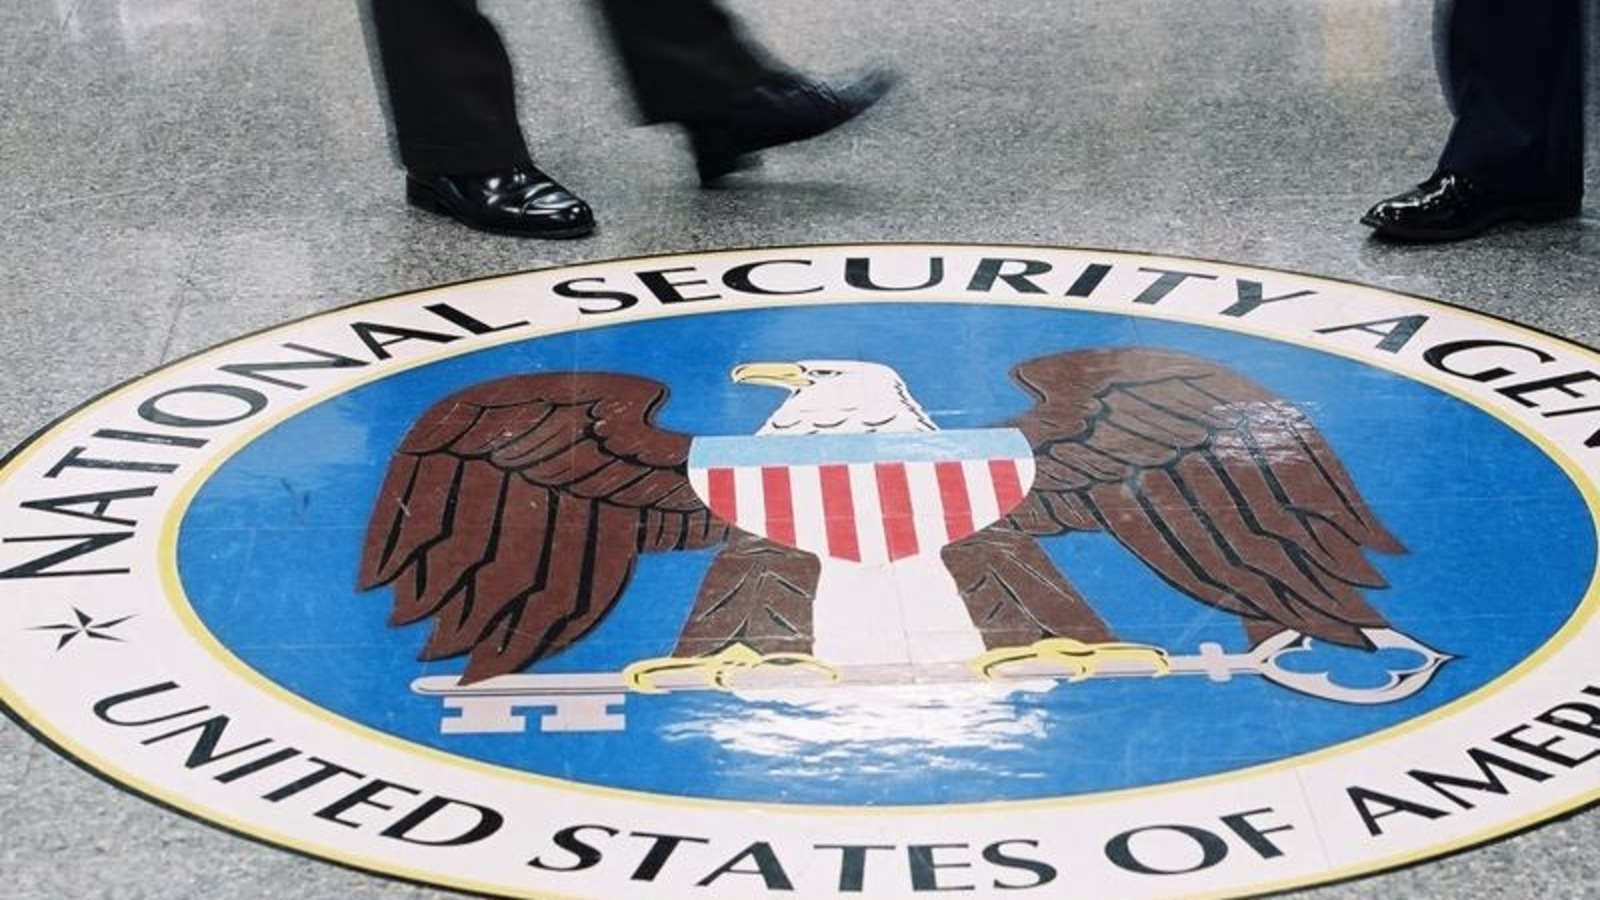 Ex Nsa Worker From Us Accused Of Selling Secrets To Russia Ordered Detained World News 1863